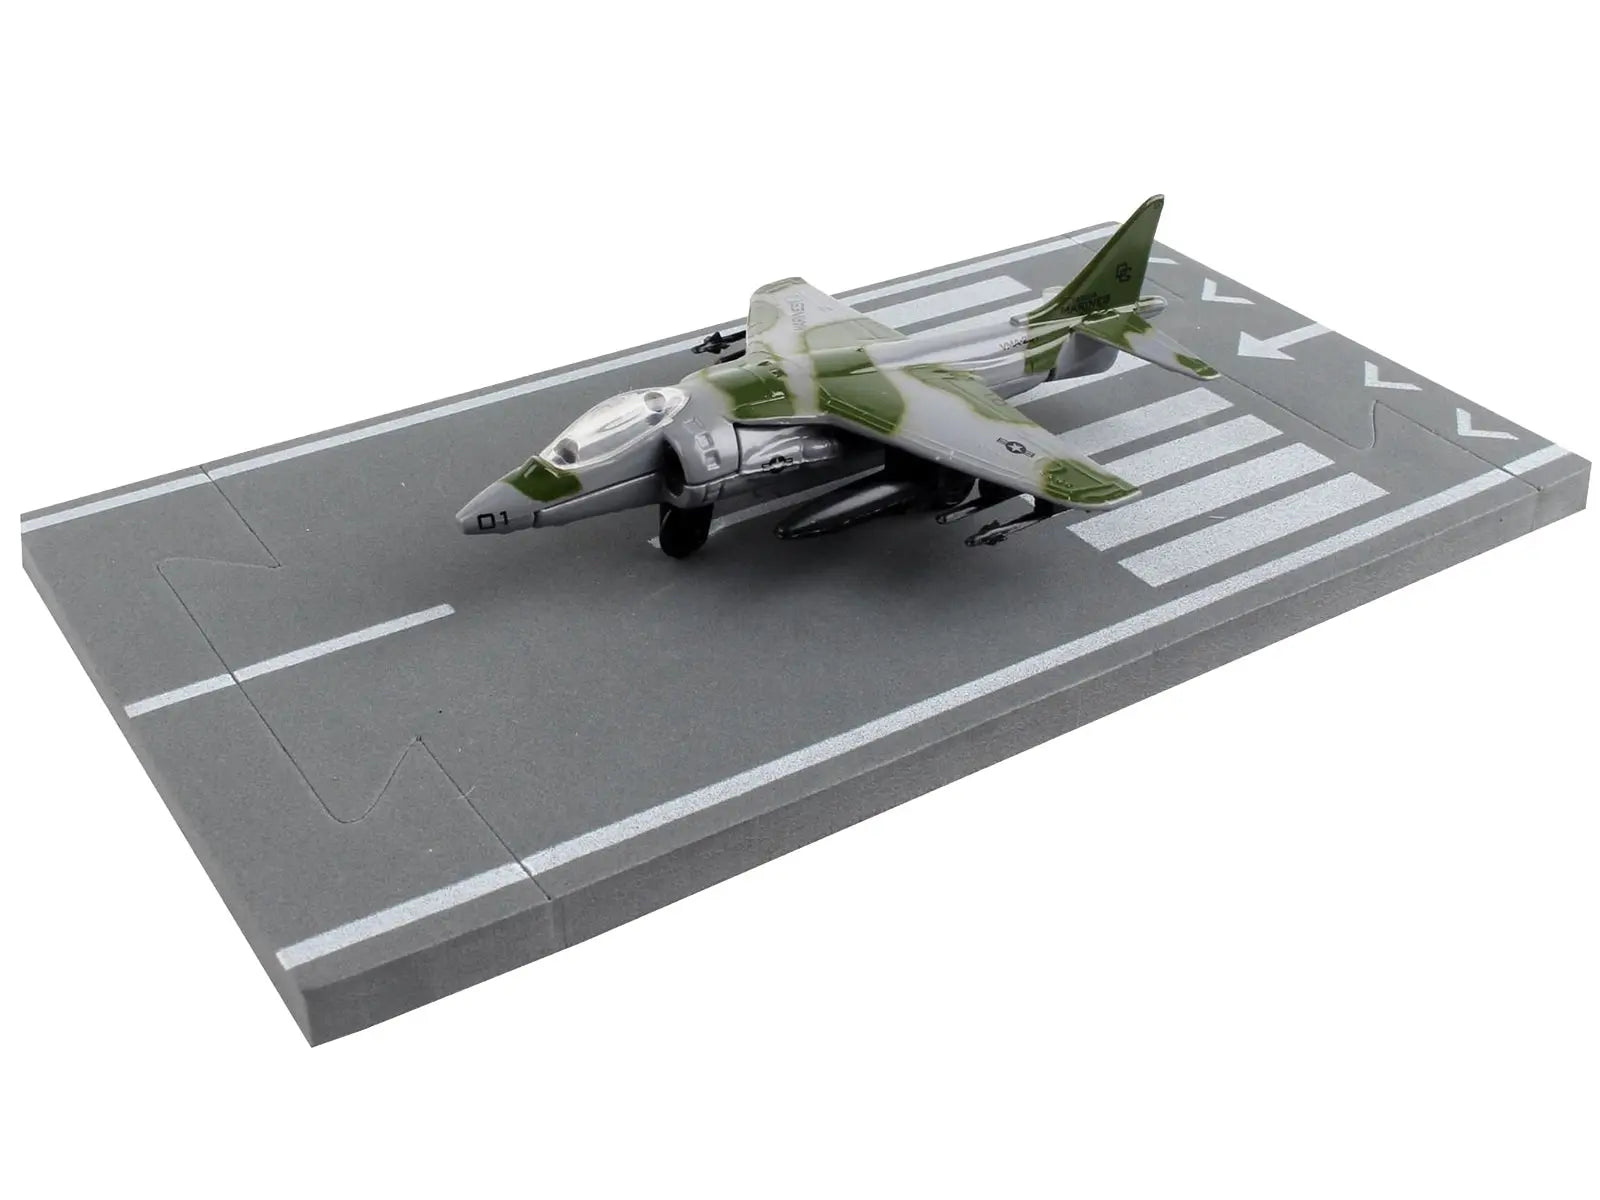 McDonnell Douglas AV-8B Harrier II Attack Aircraft Green Camouflage "United States Marine Corps" with Runway Section Diecast Model Airplane by Runway24 Runway24